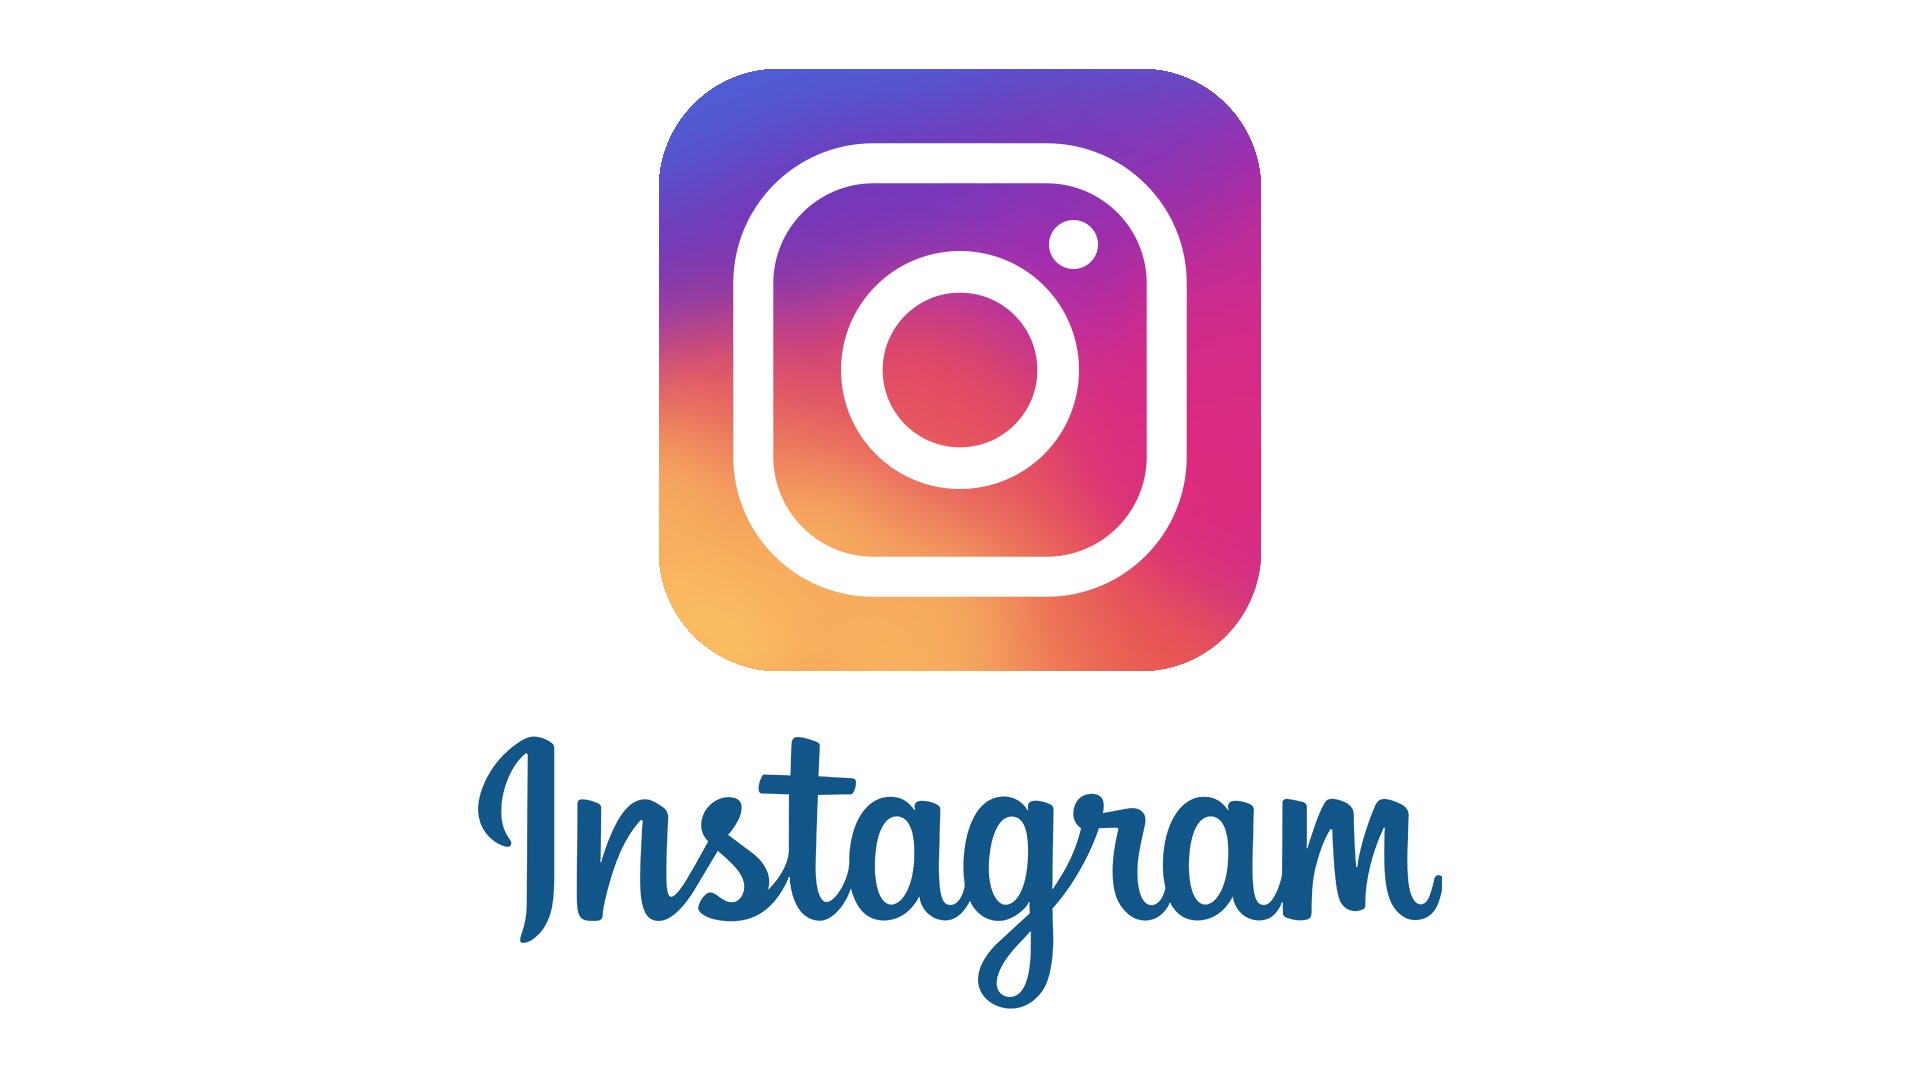 How you will get likes on Instagram quickly and easily?